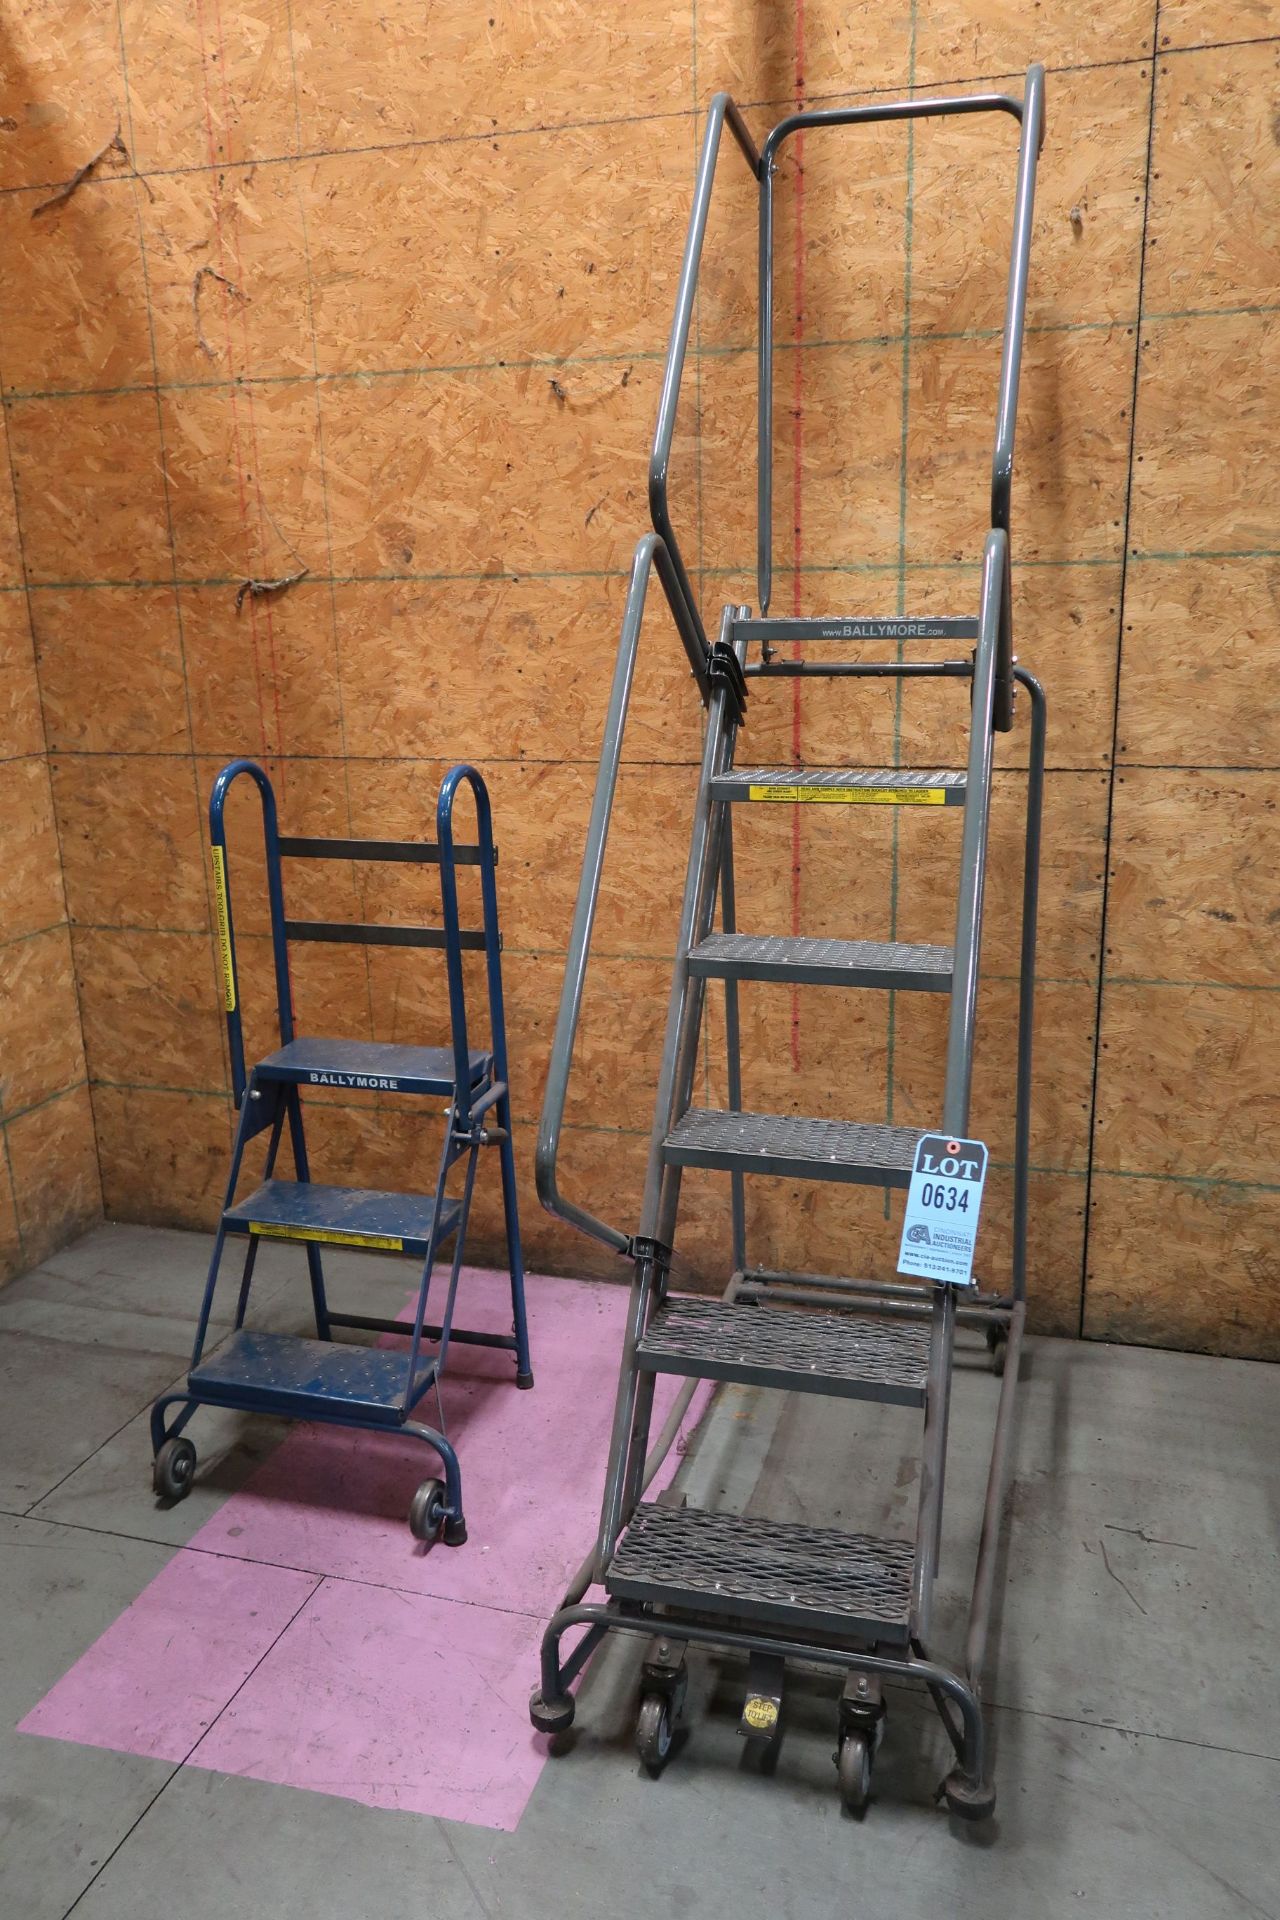 SHOP LADDERS **LOADING PRICE DUE TO ERRA - $10.00**